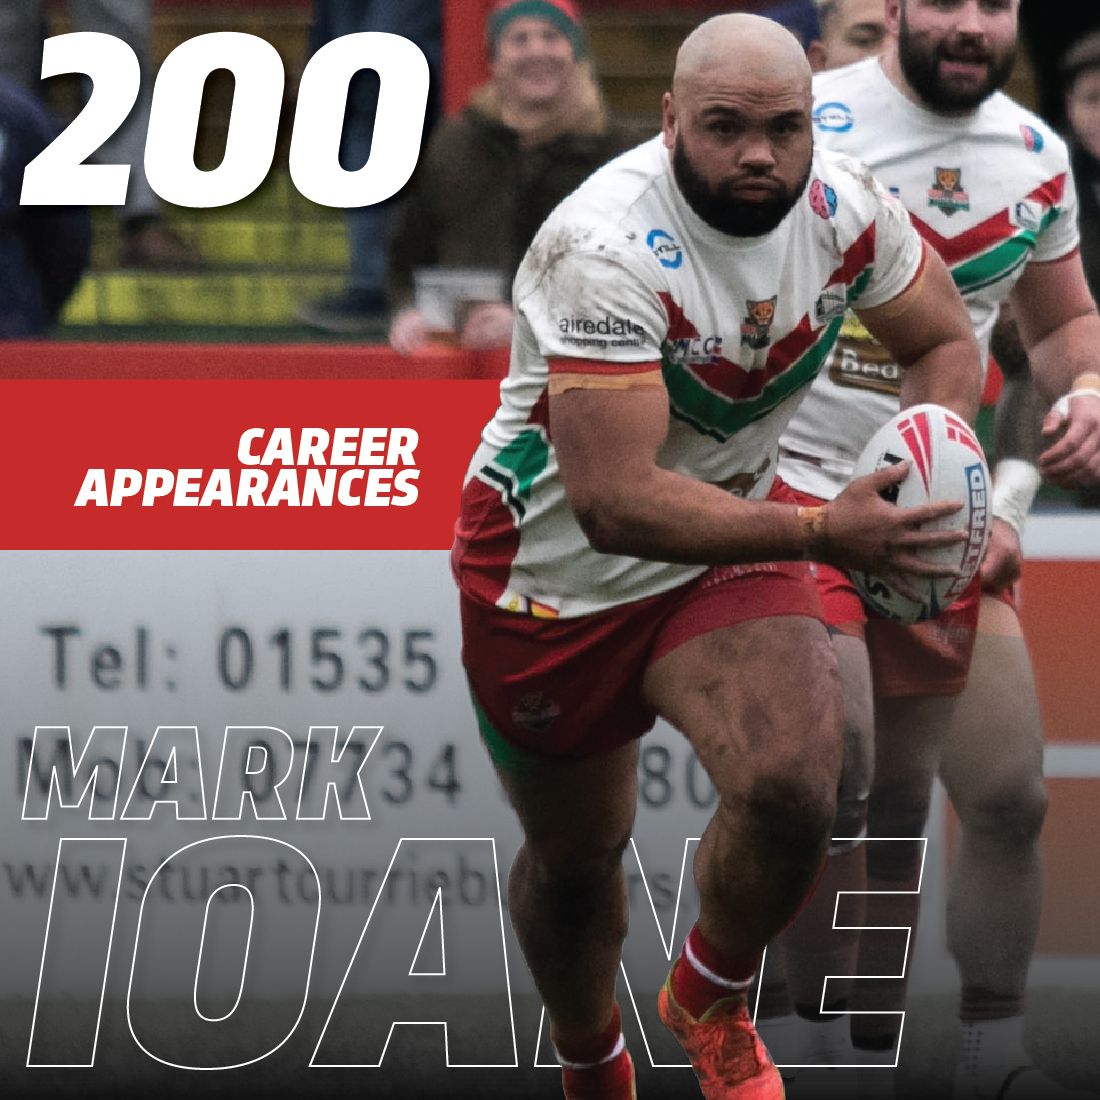 Mark Ioane is in line to make his 200th Career Appearance this afternoon at Cougar Park. Congrats Mark on this massive milestone!